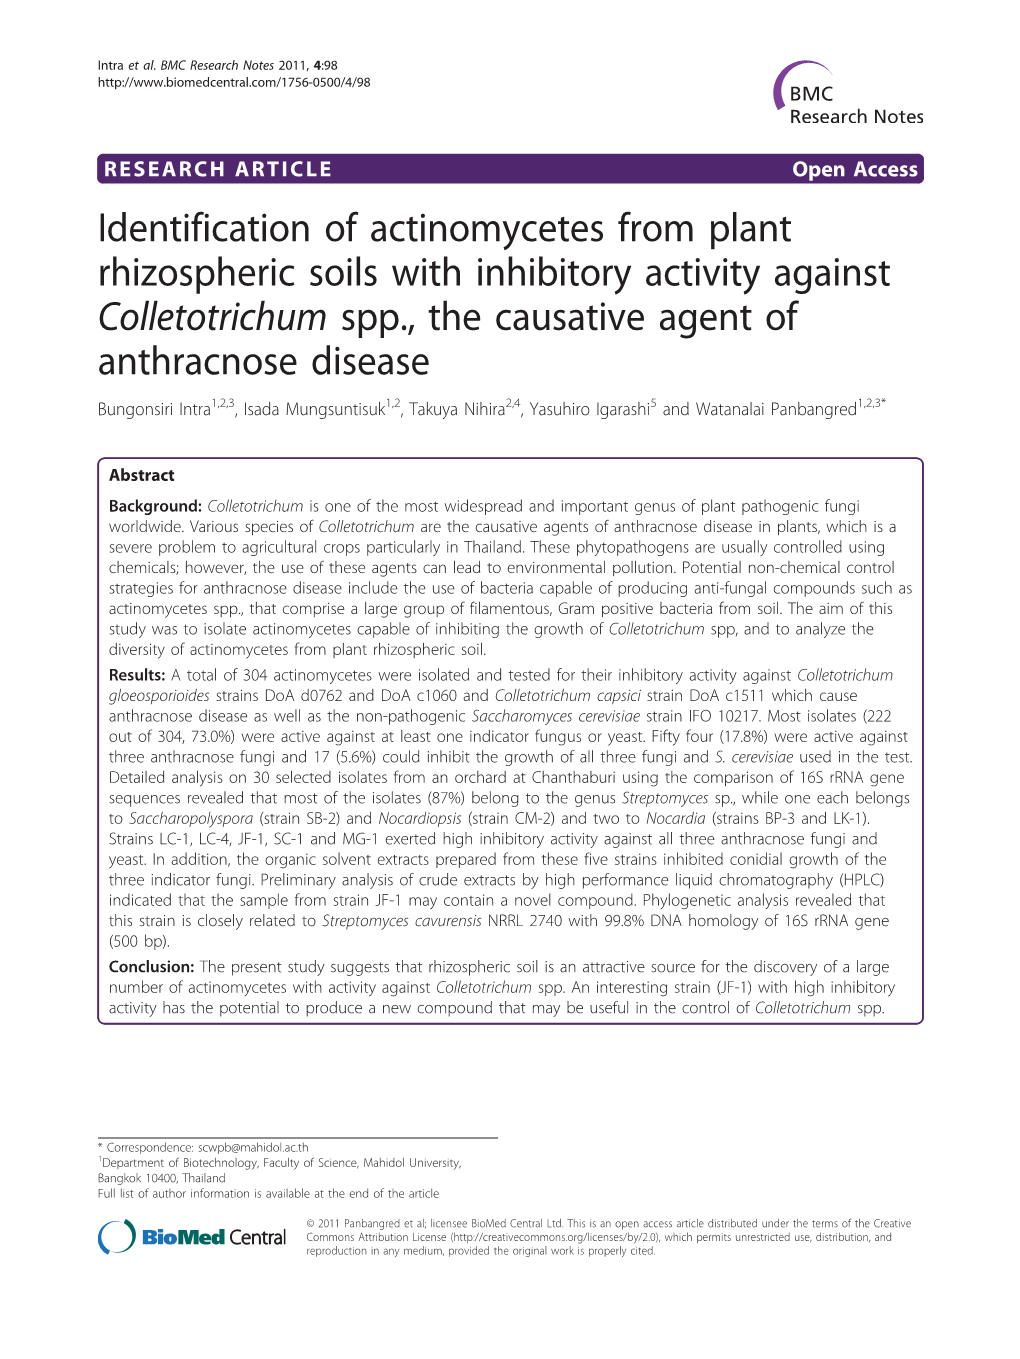 Identification of Actinomycetes from Plant Rhizospheric Soils With